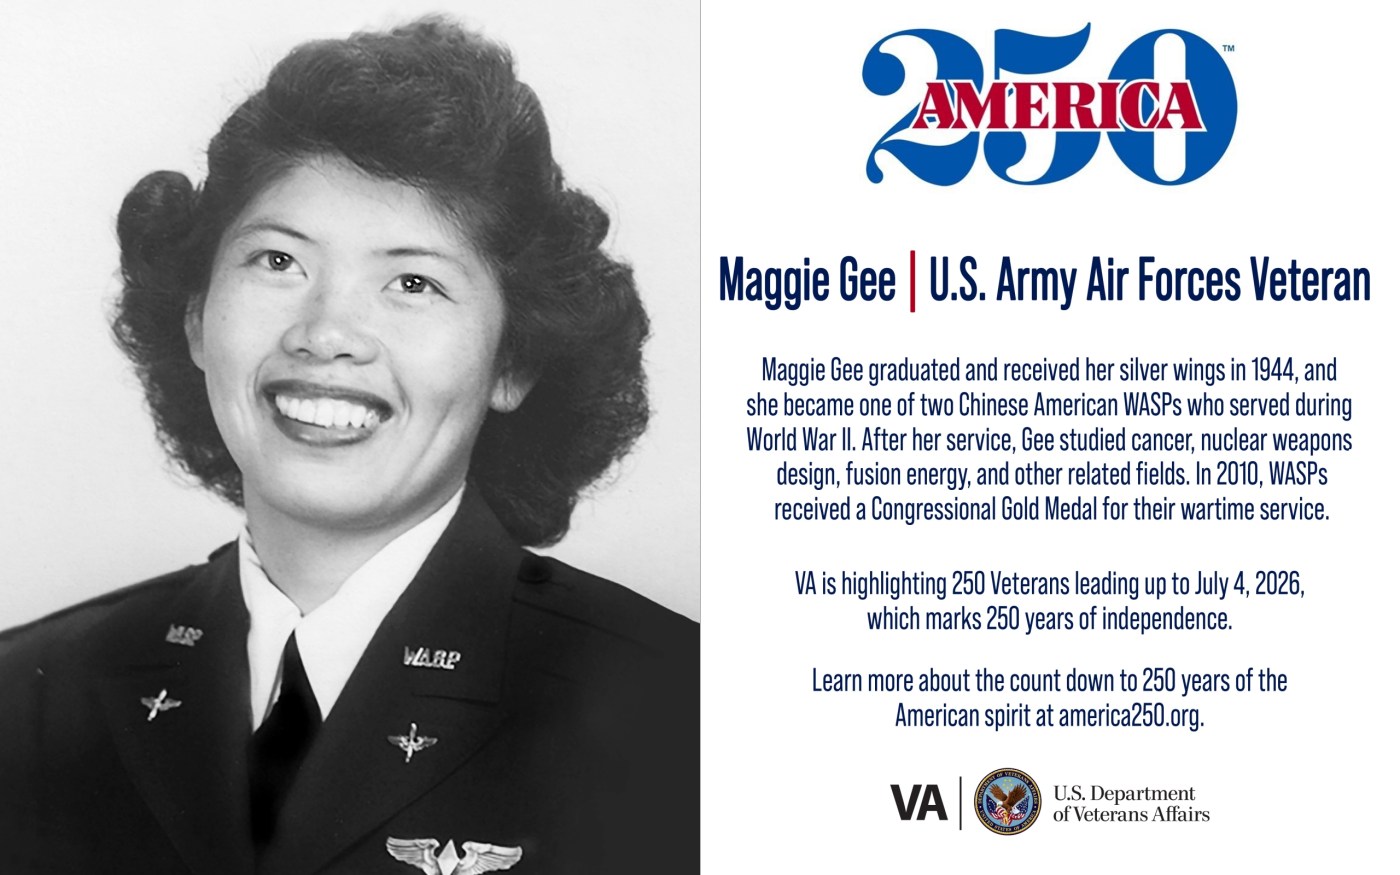 This week’s America250 salute is Army Air Forces Veteran Maggie Gee, who was one of two Chinese American pilots who served in the Women Airforce Service Pilots during World War II.